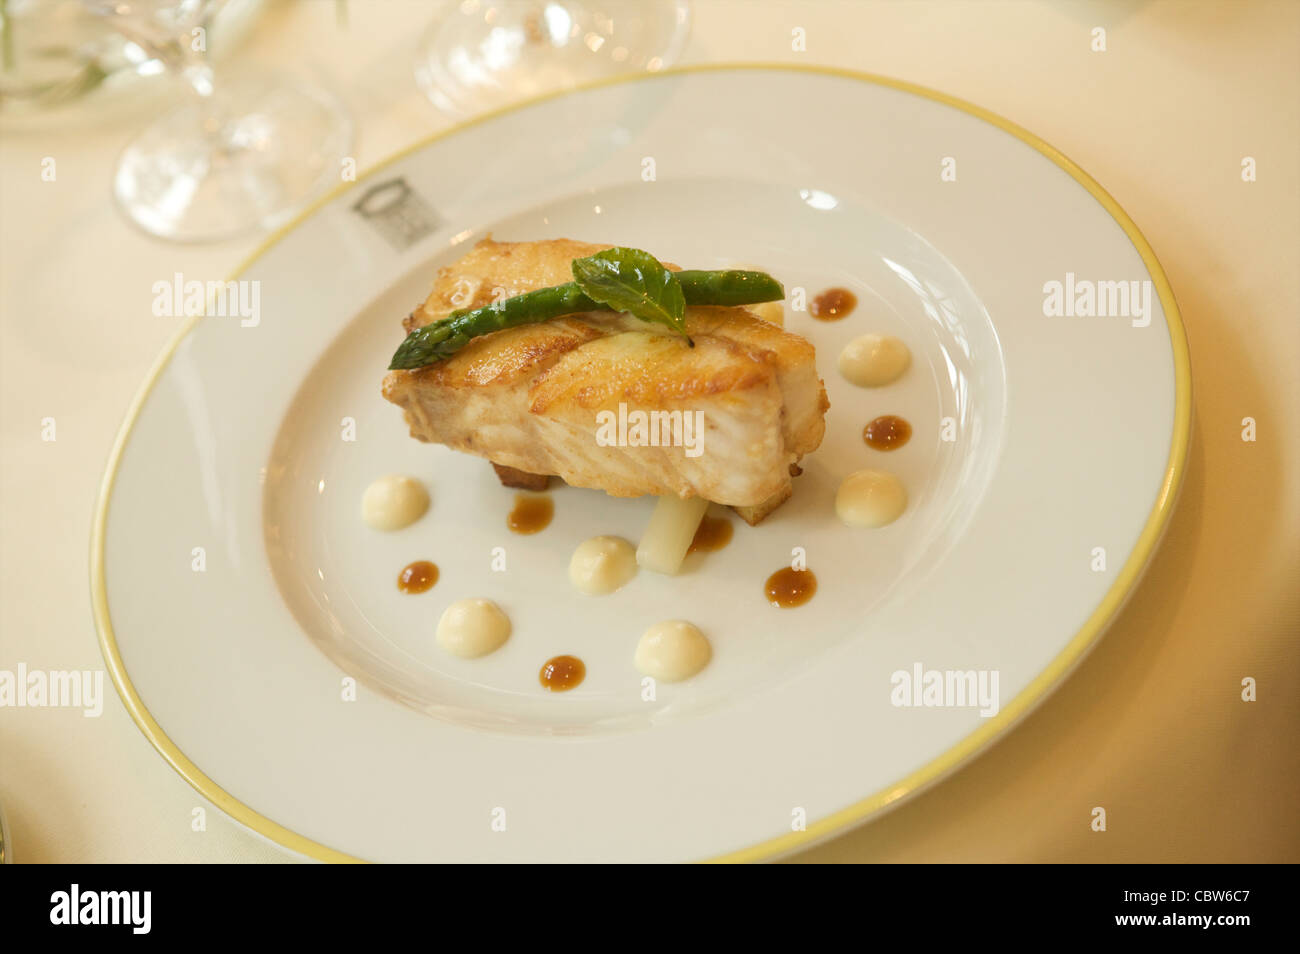 Plated food from Restaurant Patrick Guilbaud, the only two Michelin Star restaurant in the Merrion Hotel Dublin, Ireland. Stock Photo